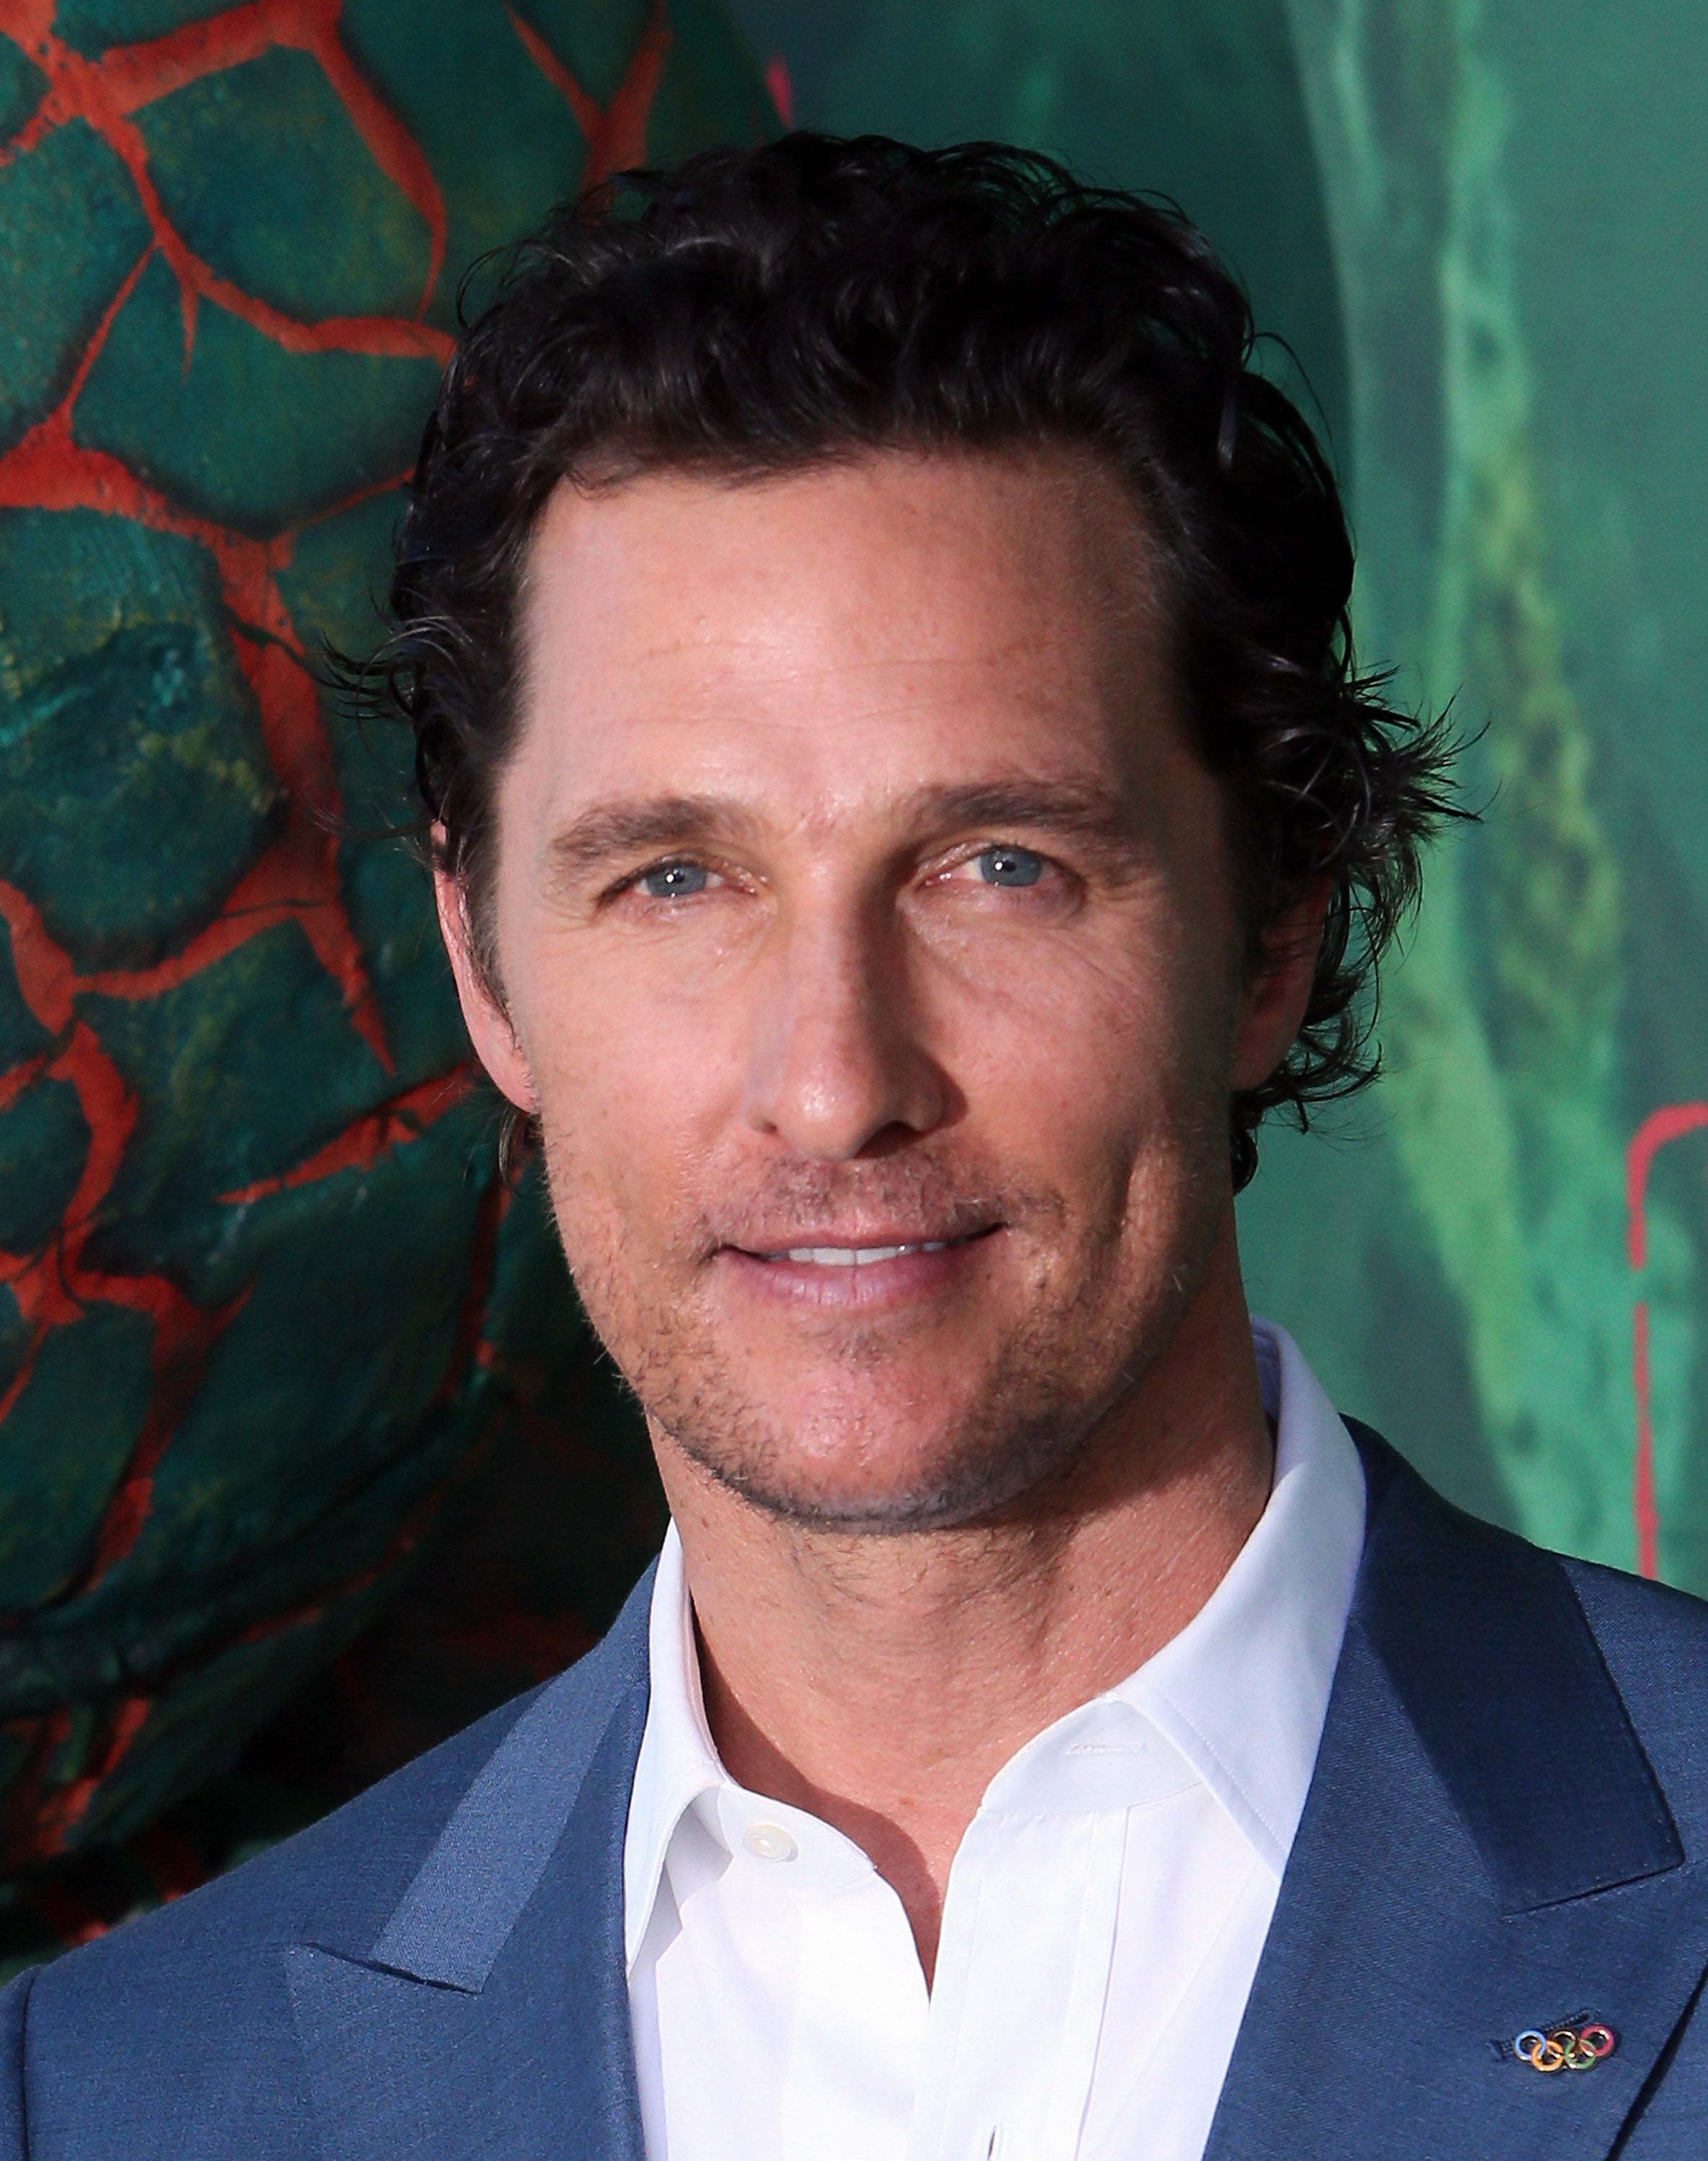 Matthew McConaughey at the premiere of "Kubo And The Two Strings" in Universal City, California on August 14, 2016 | Source: Getty Images